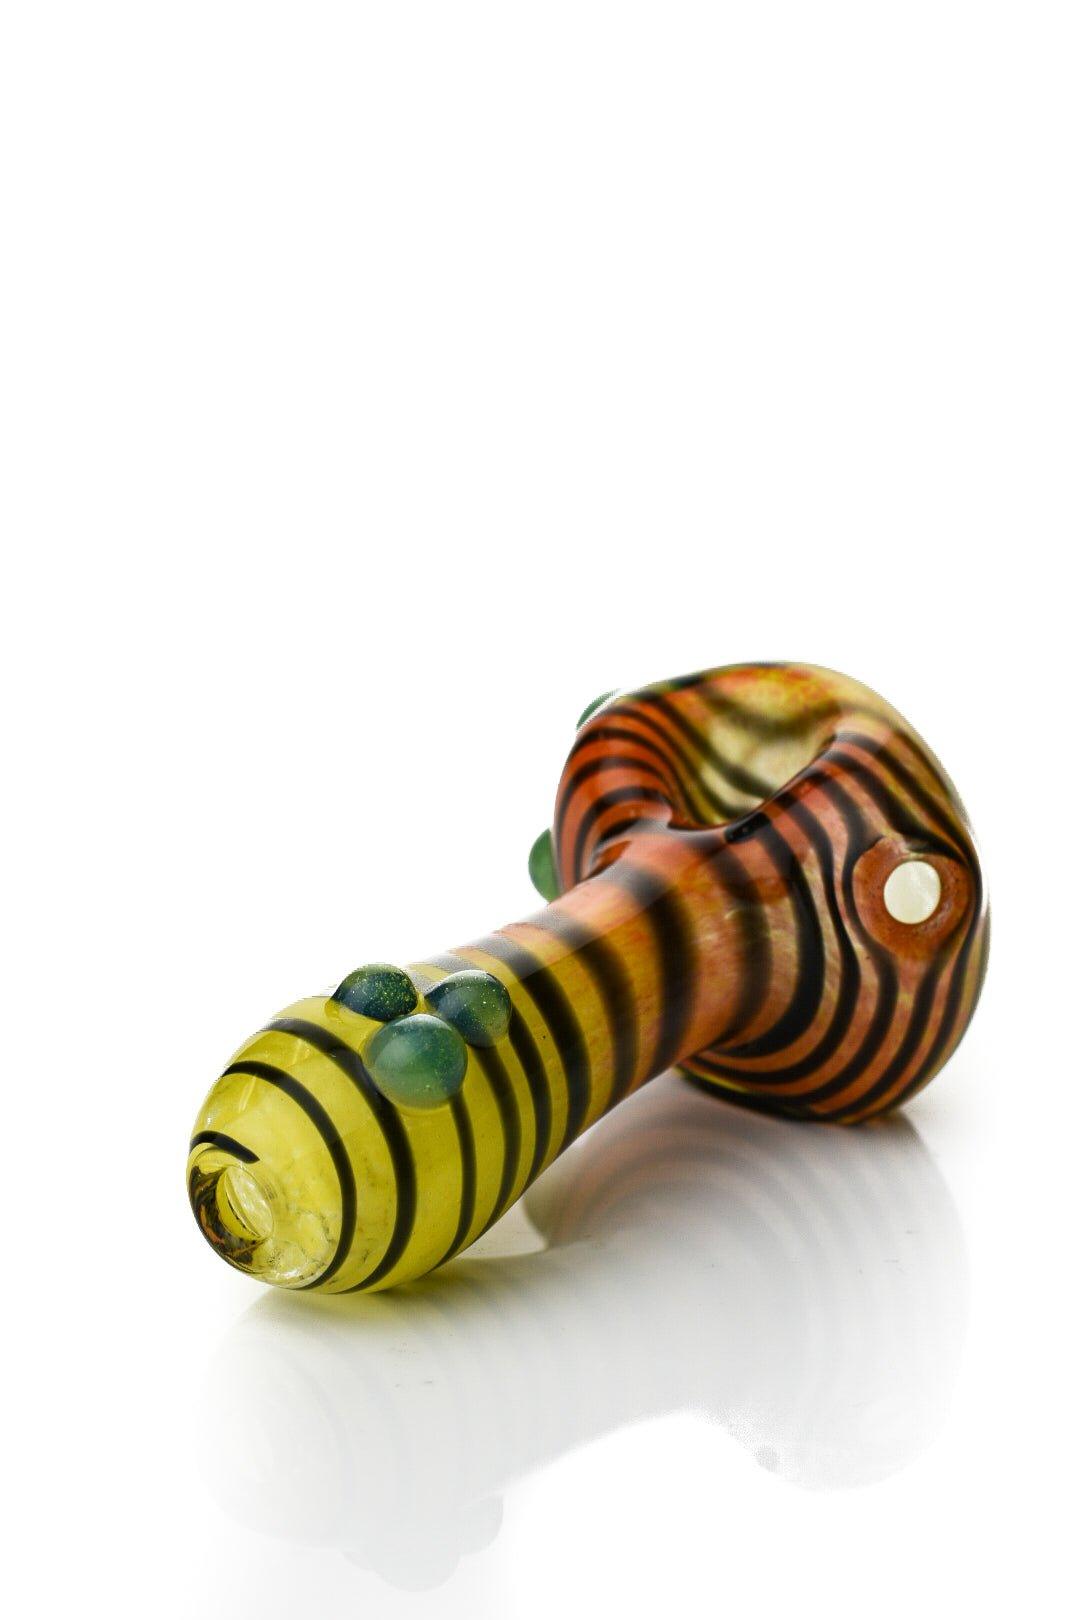 Deviant Glass Handpipes Deviant In & Out Spoon Handpipe 2